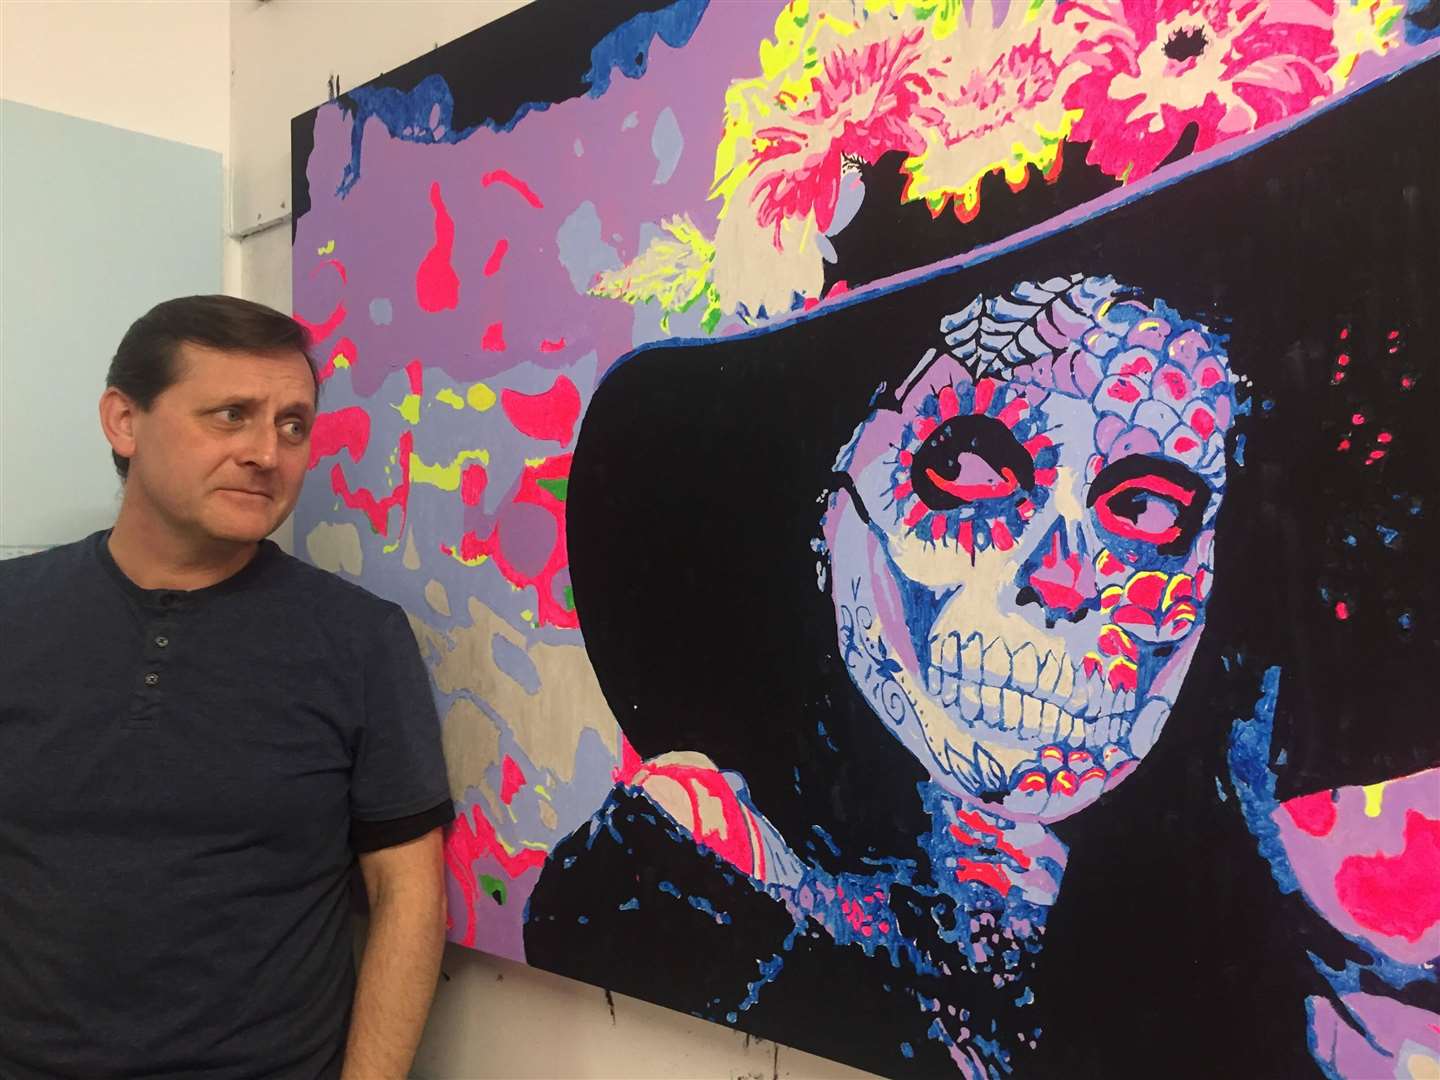 Johnathan Ash with one of his paintings